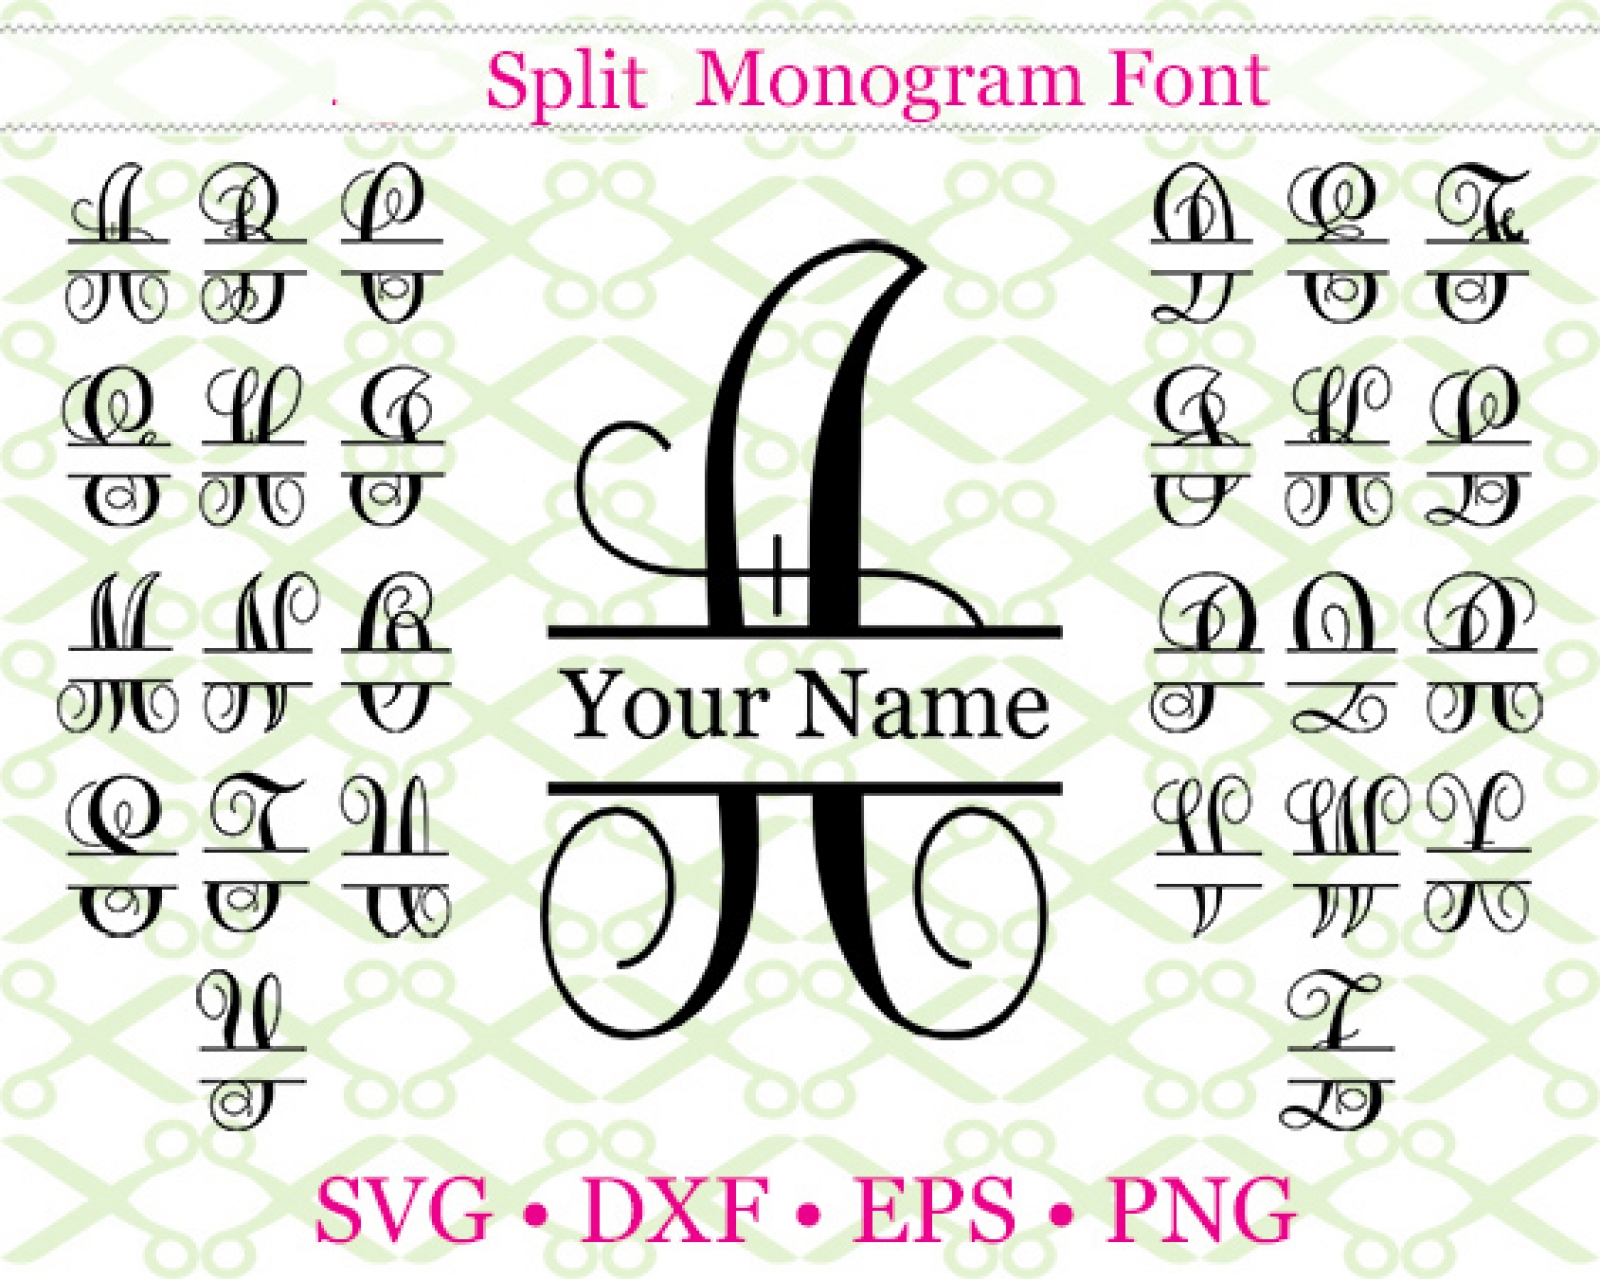 Decorative Monogram Split Letter Graphic Design Template Isolated Royalty Free  SVG, Cliparts, Vectors, and Stock Illustration. Image 128387388.